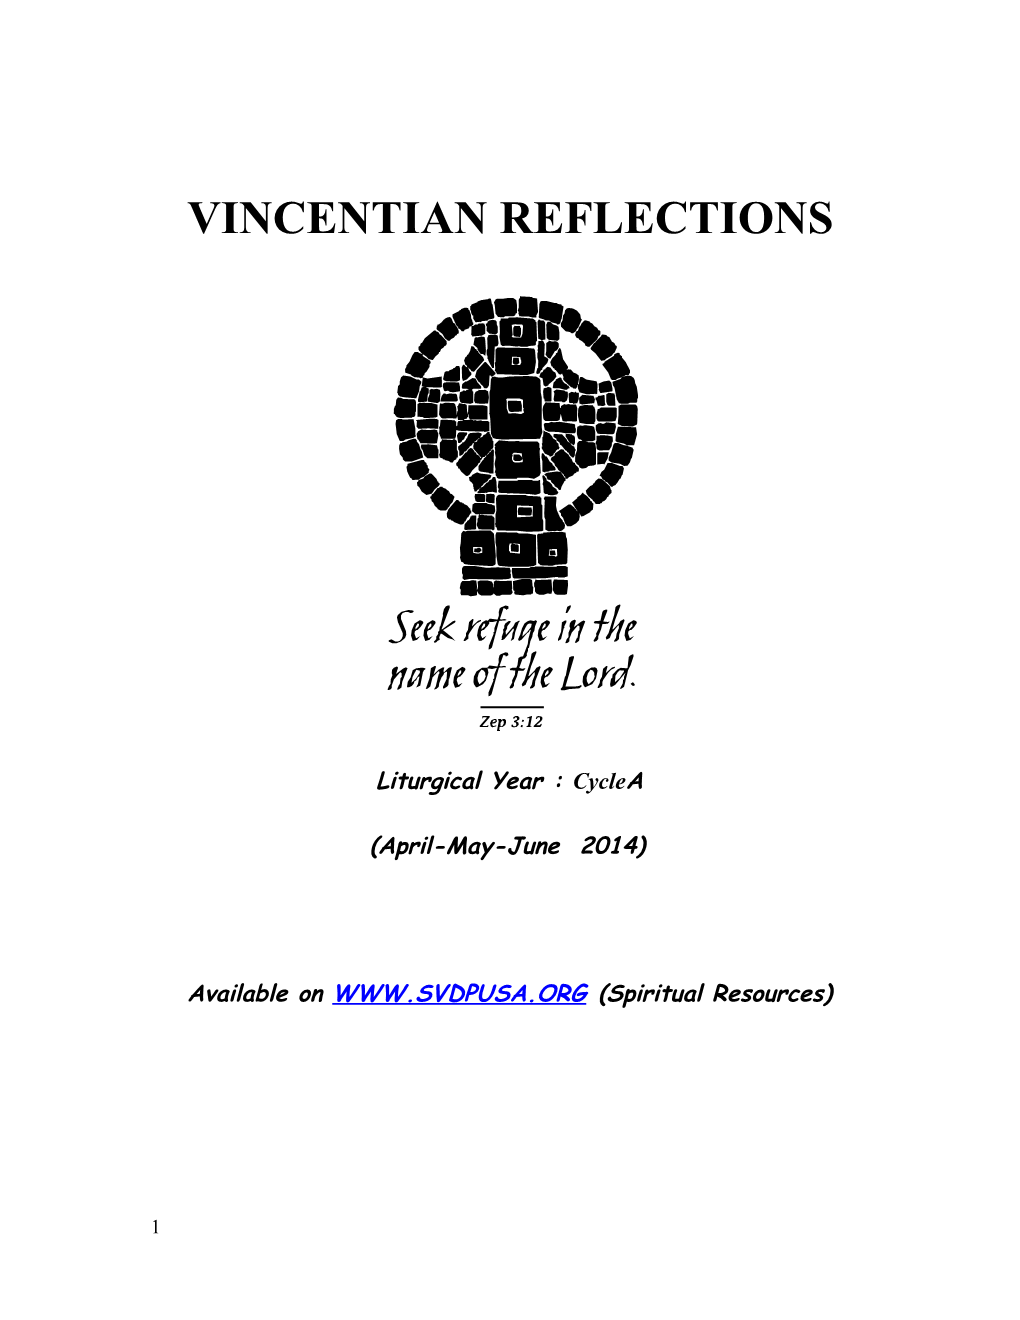 Vincentian Reflections